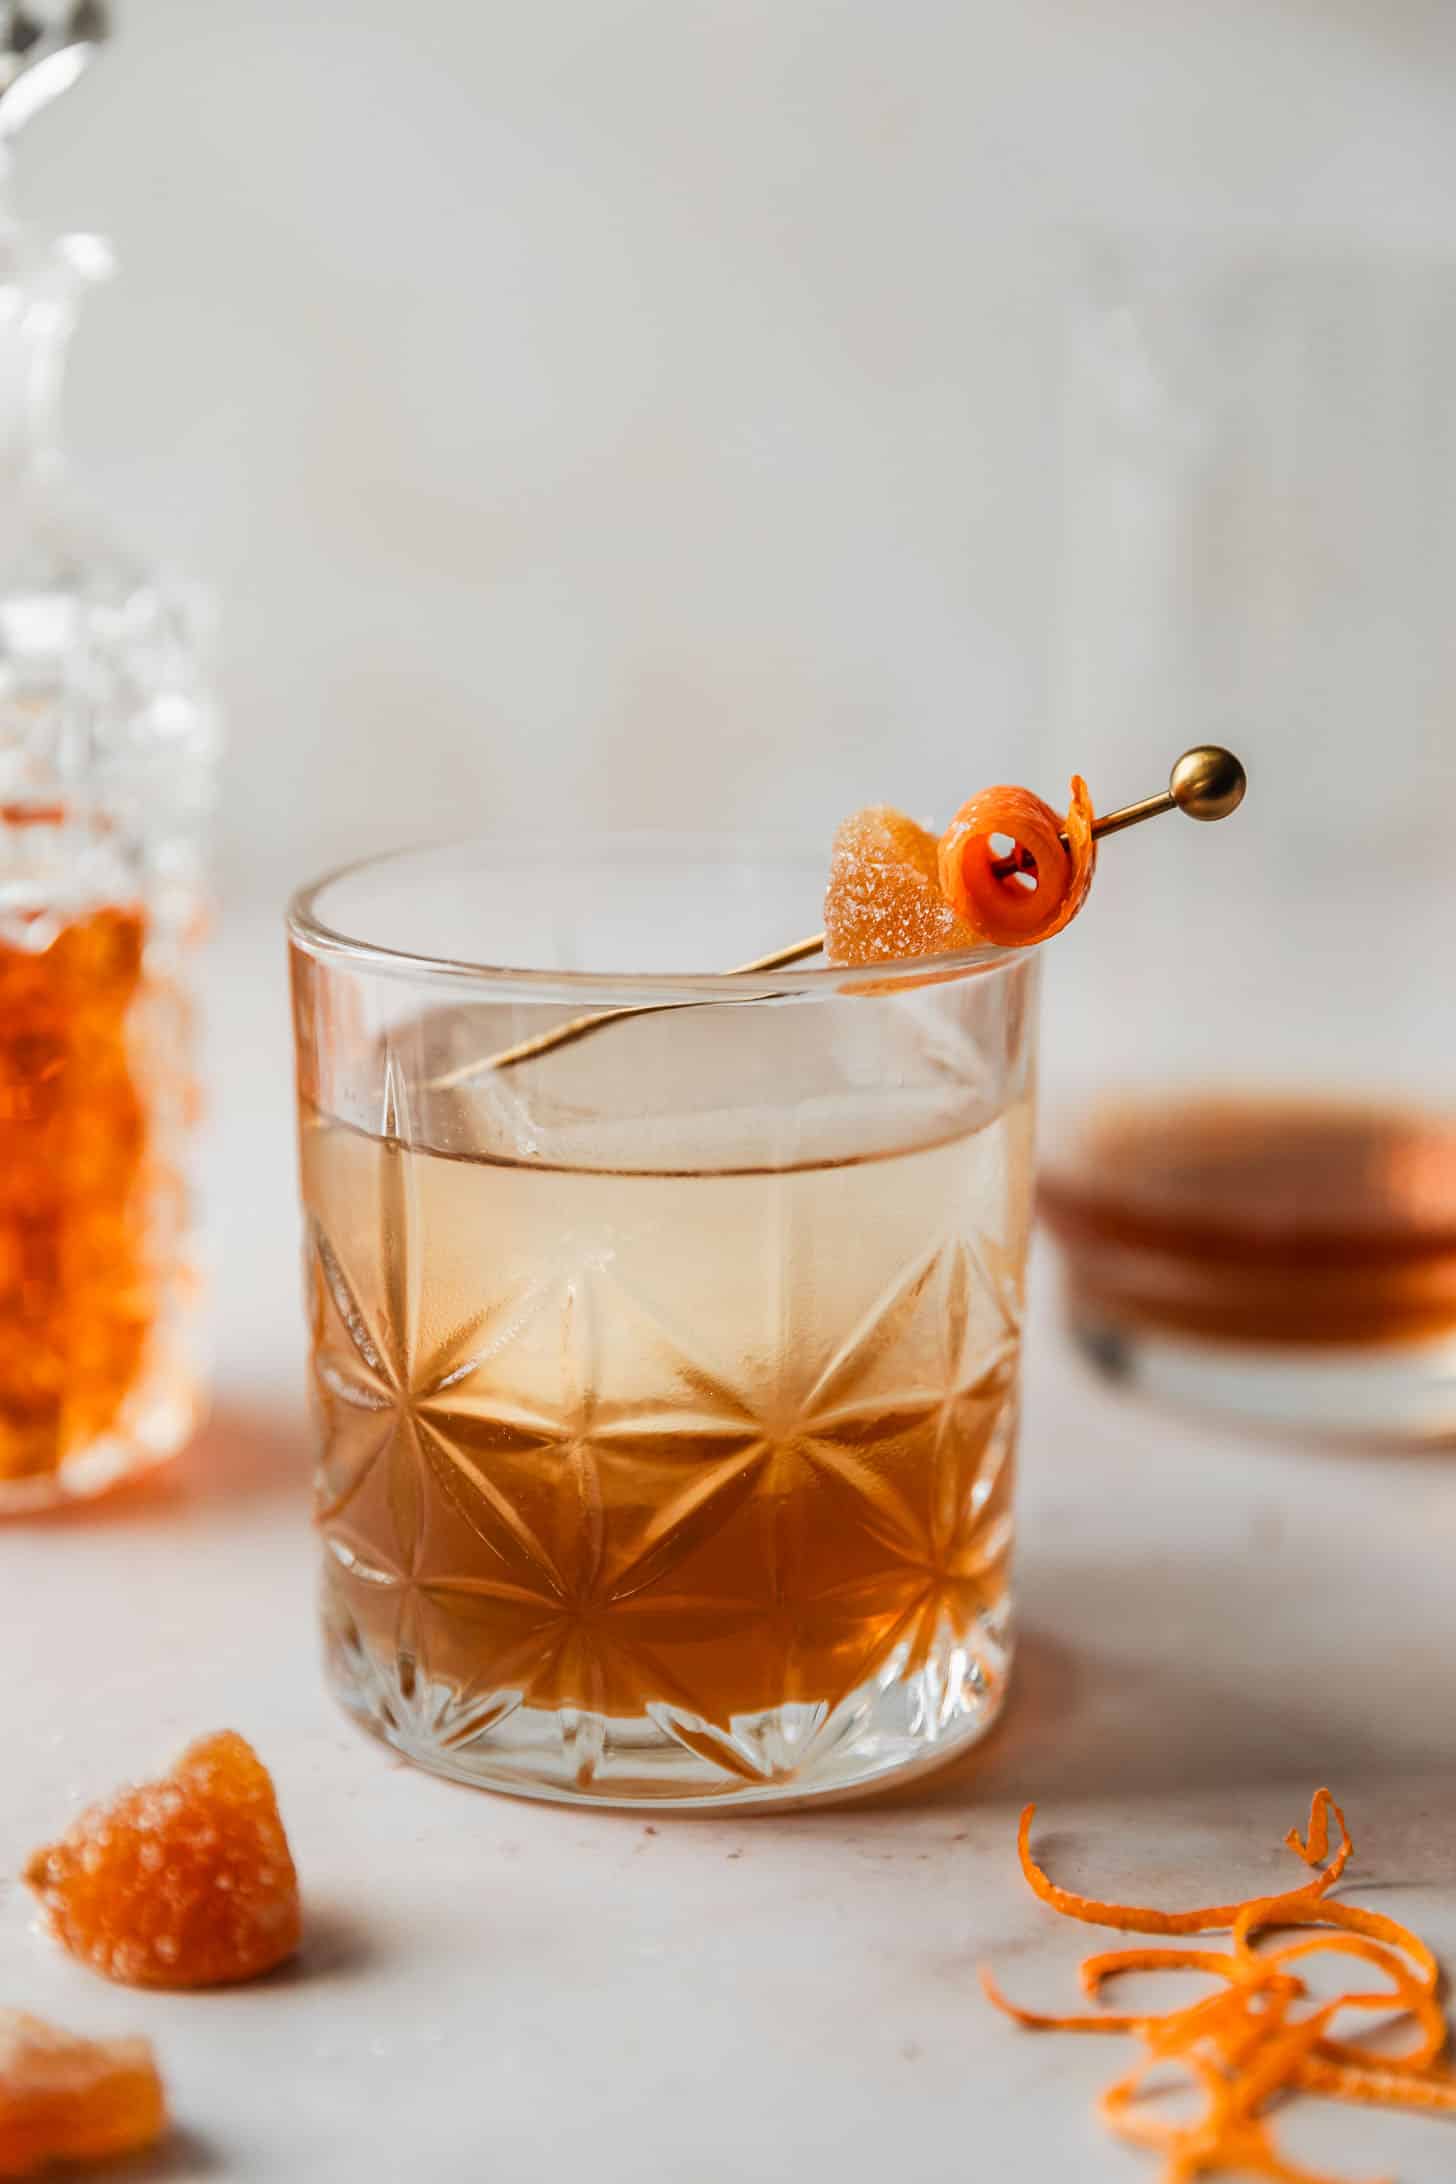 A ginger old fashioned on a tan marble counter next to a decanter of bourbon, cocktail mixing glass, crystallized ginger, and orange peels.